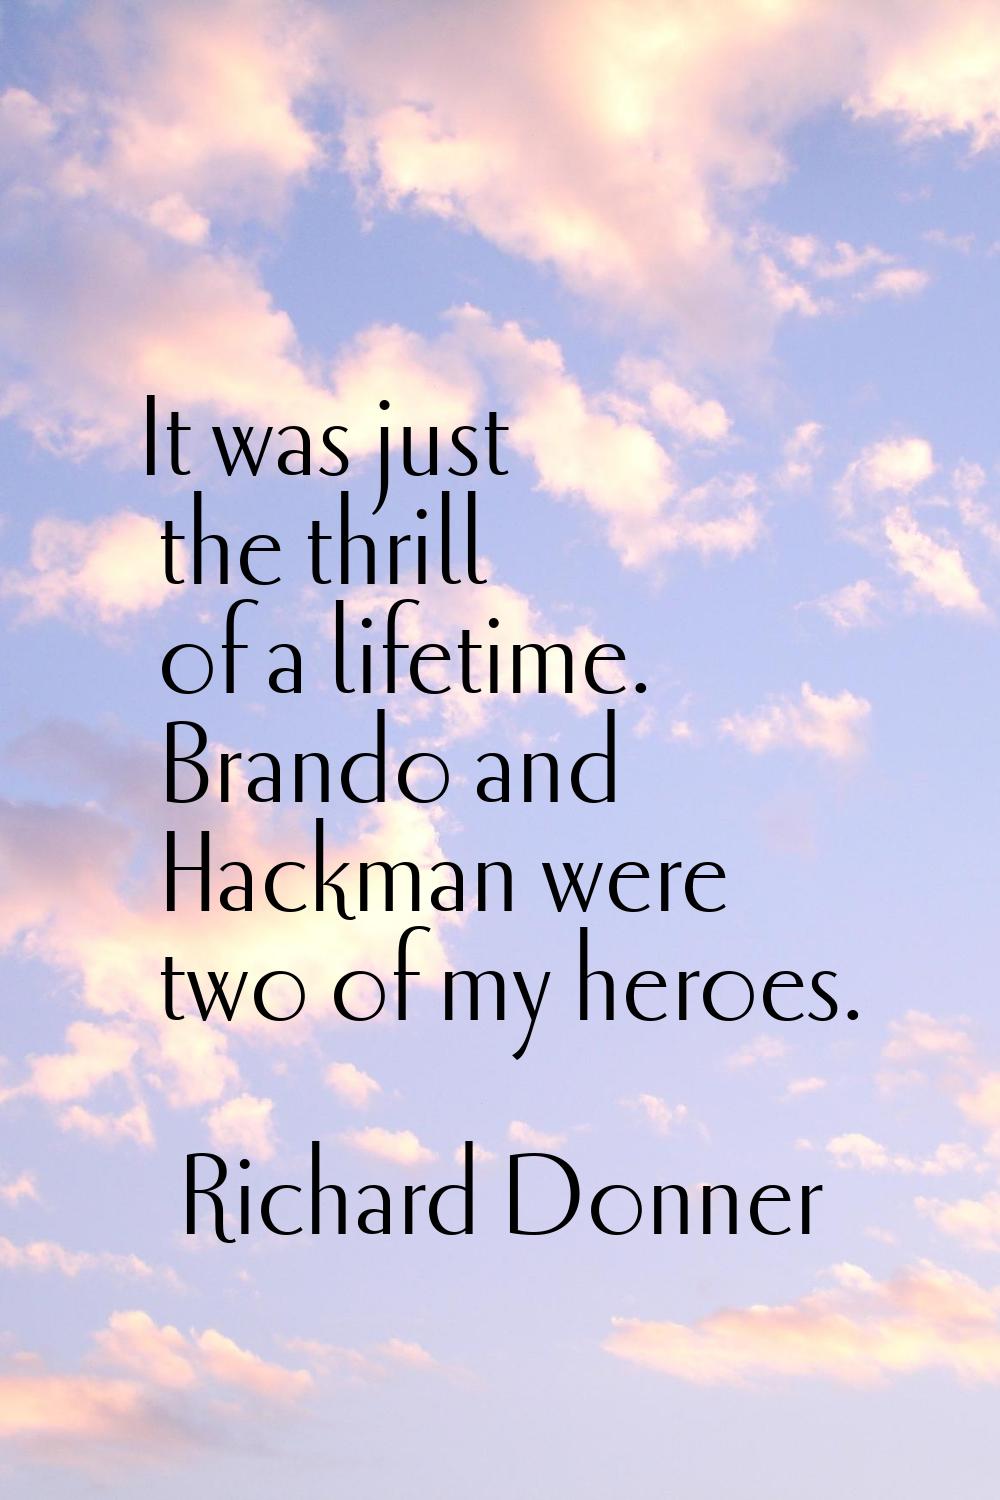 It was just the thrill of a lifetime. Brando and Hackman were two of my heroes.